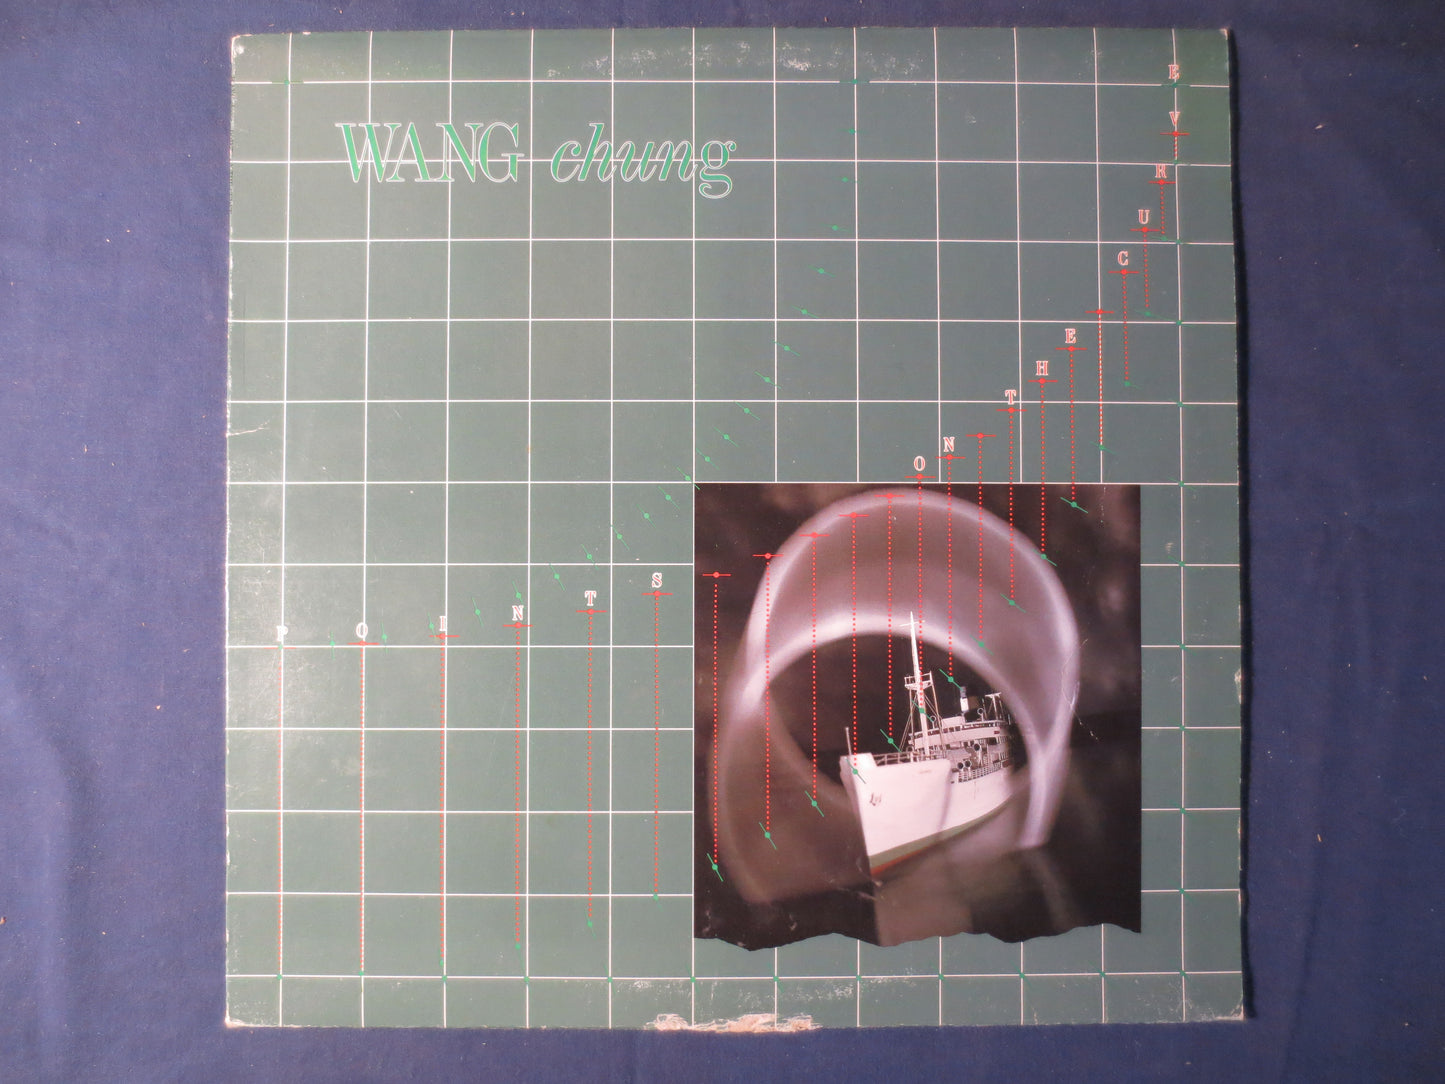 WANG CHUNG Record, POINTS On The Curve, Wang Chung Vinyl, Wang Chung Albums, Wang Chung Lp, Vintage Vinyl, 1983 Records